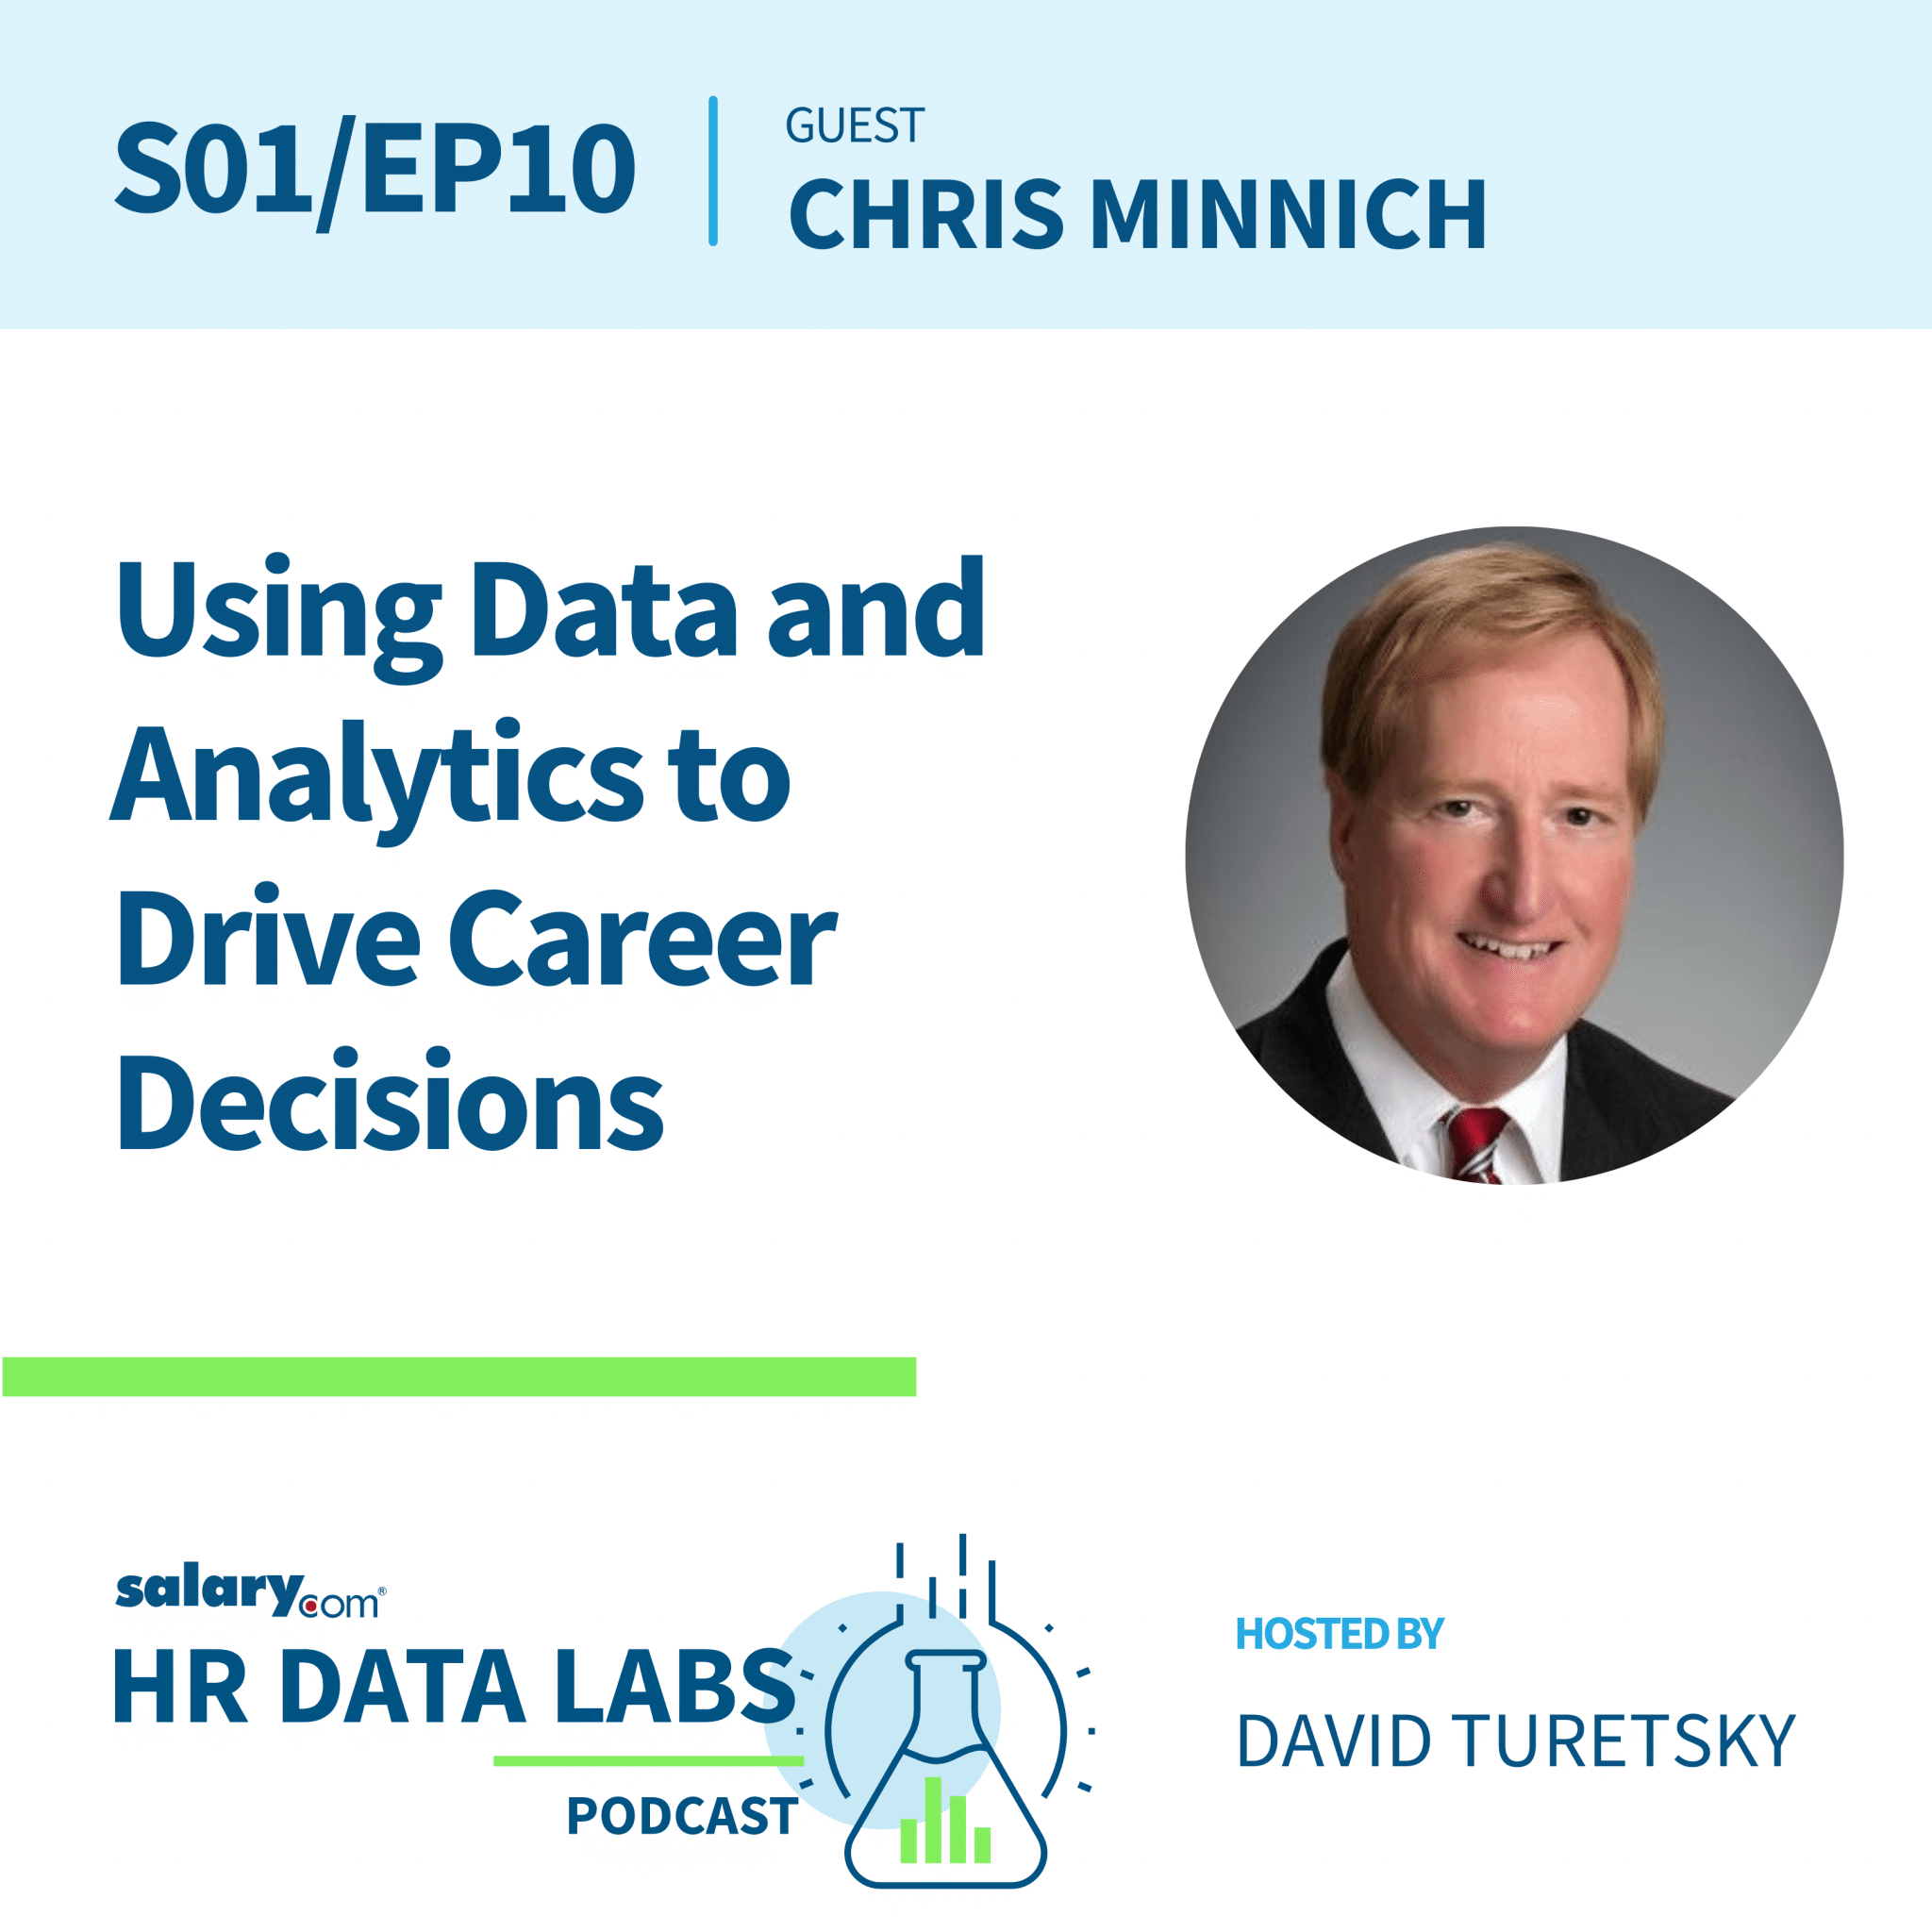 Using Data and Analytics to Drive Career Decisions